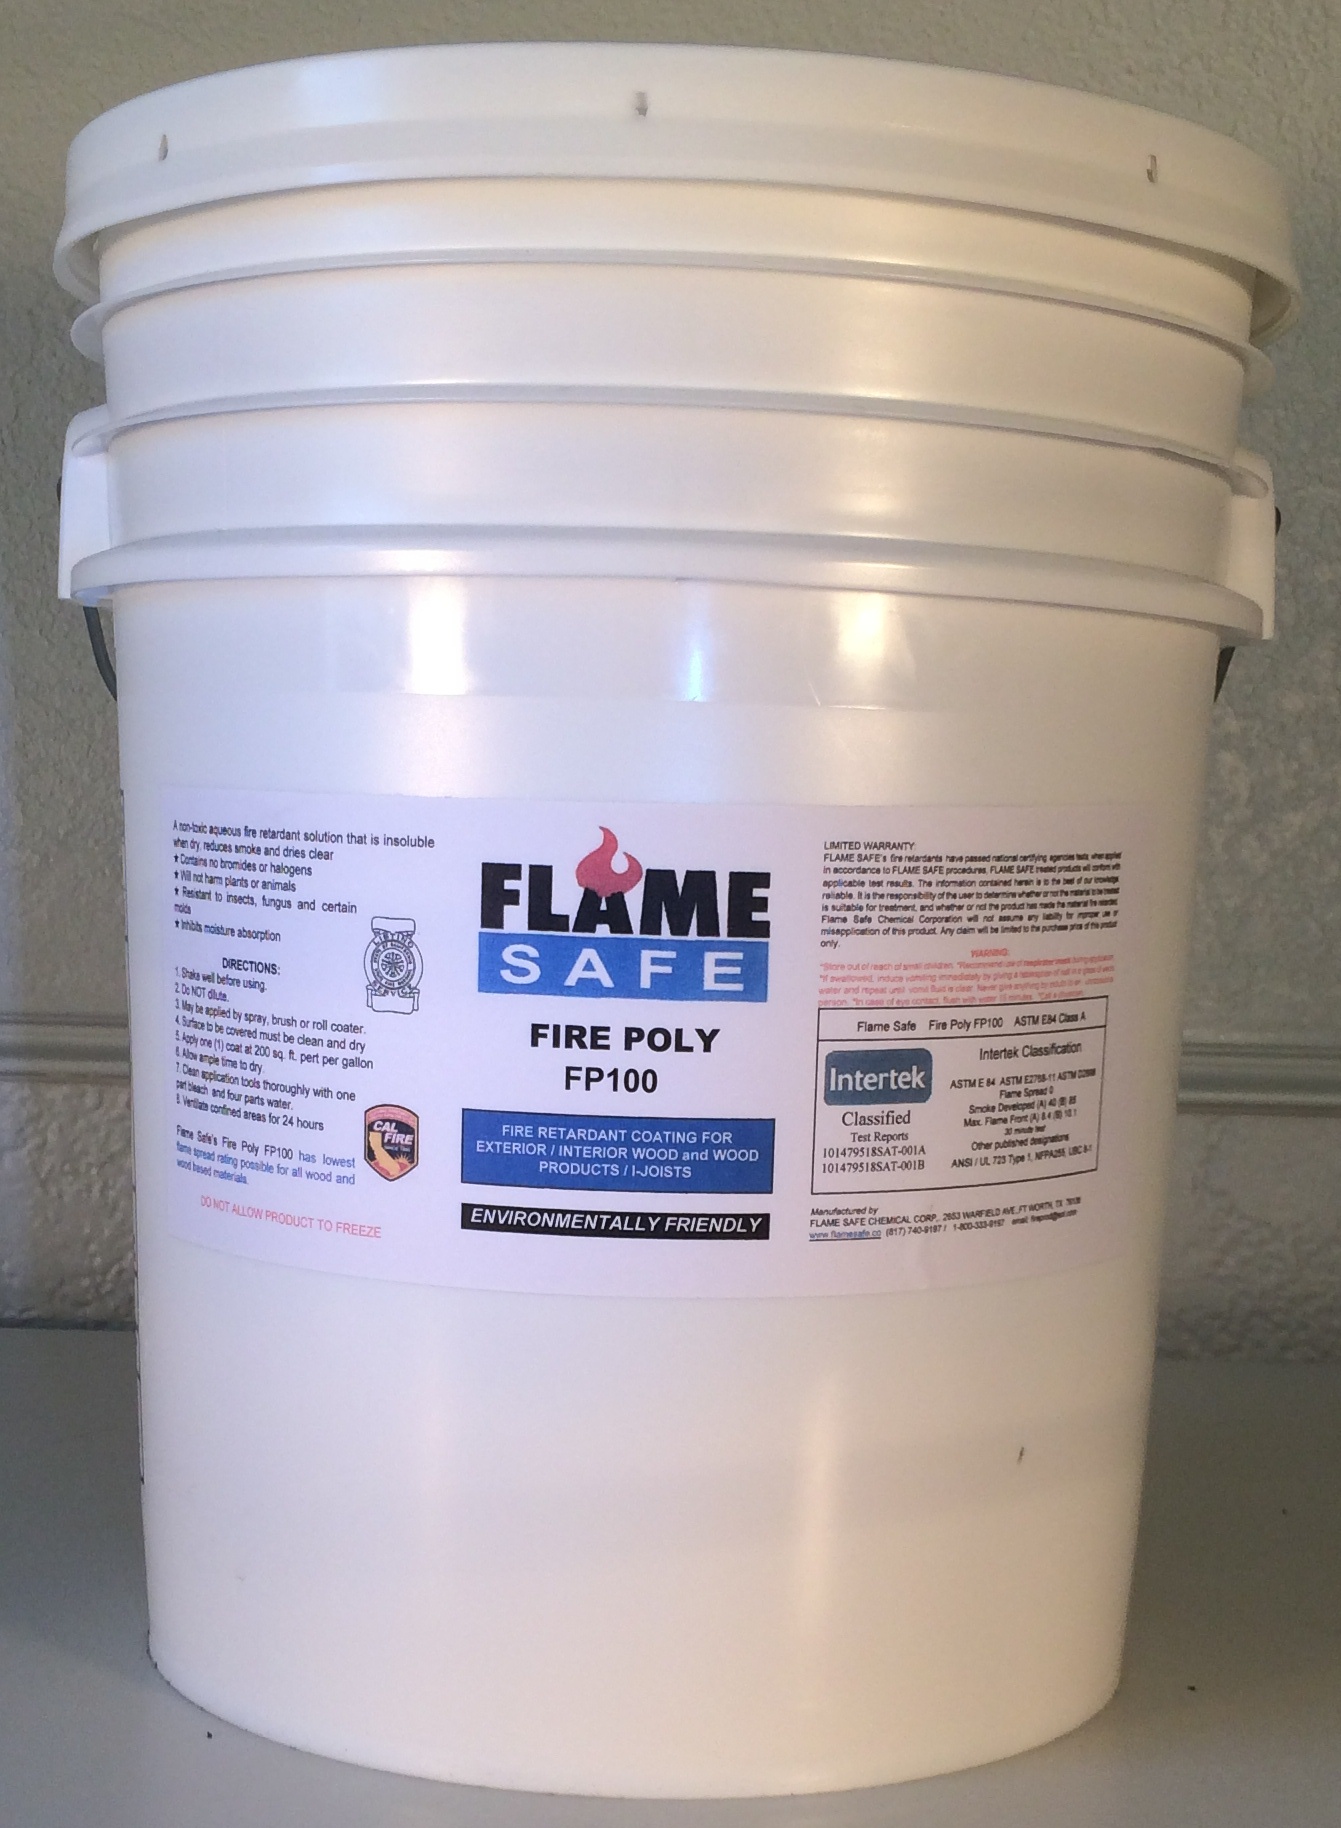 Fire Poly FP100 exterior and interior fire retardant for wood and wood products